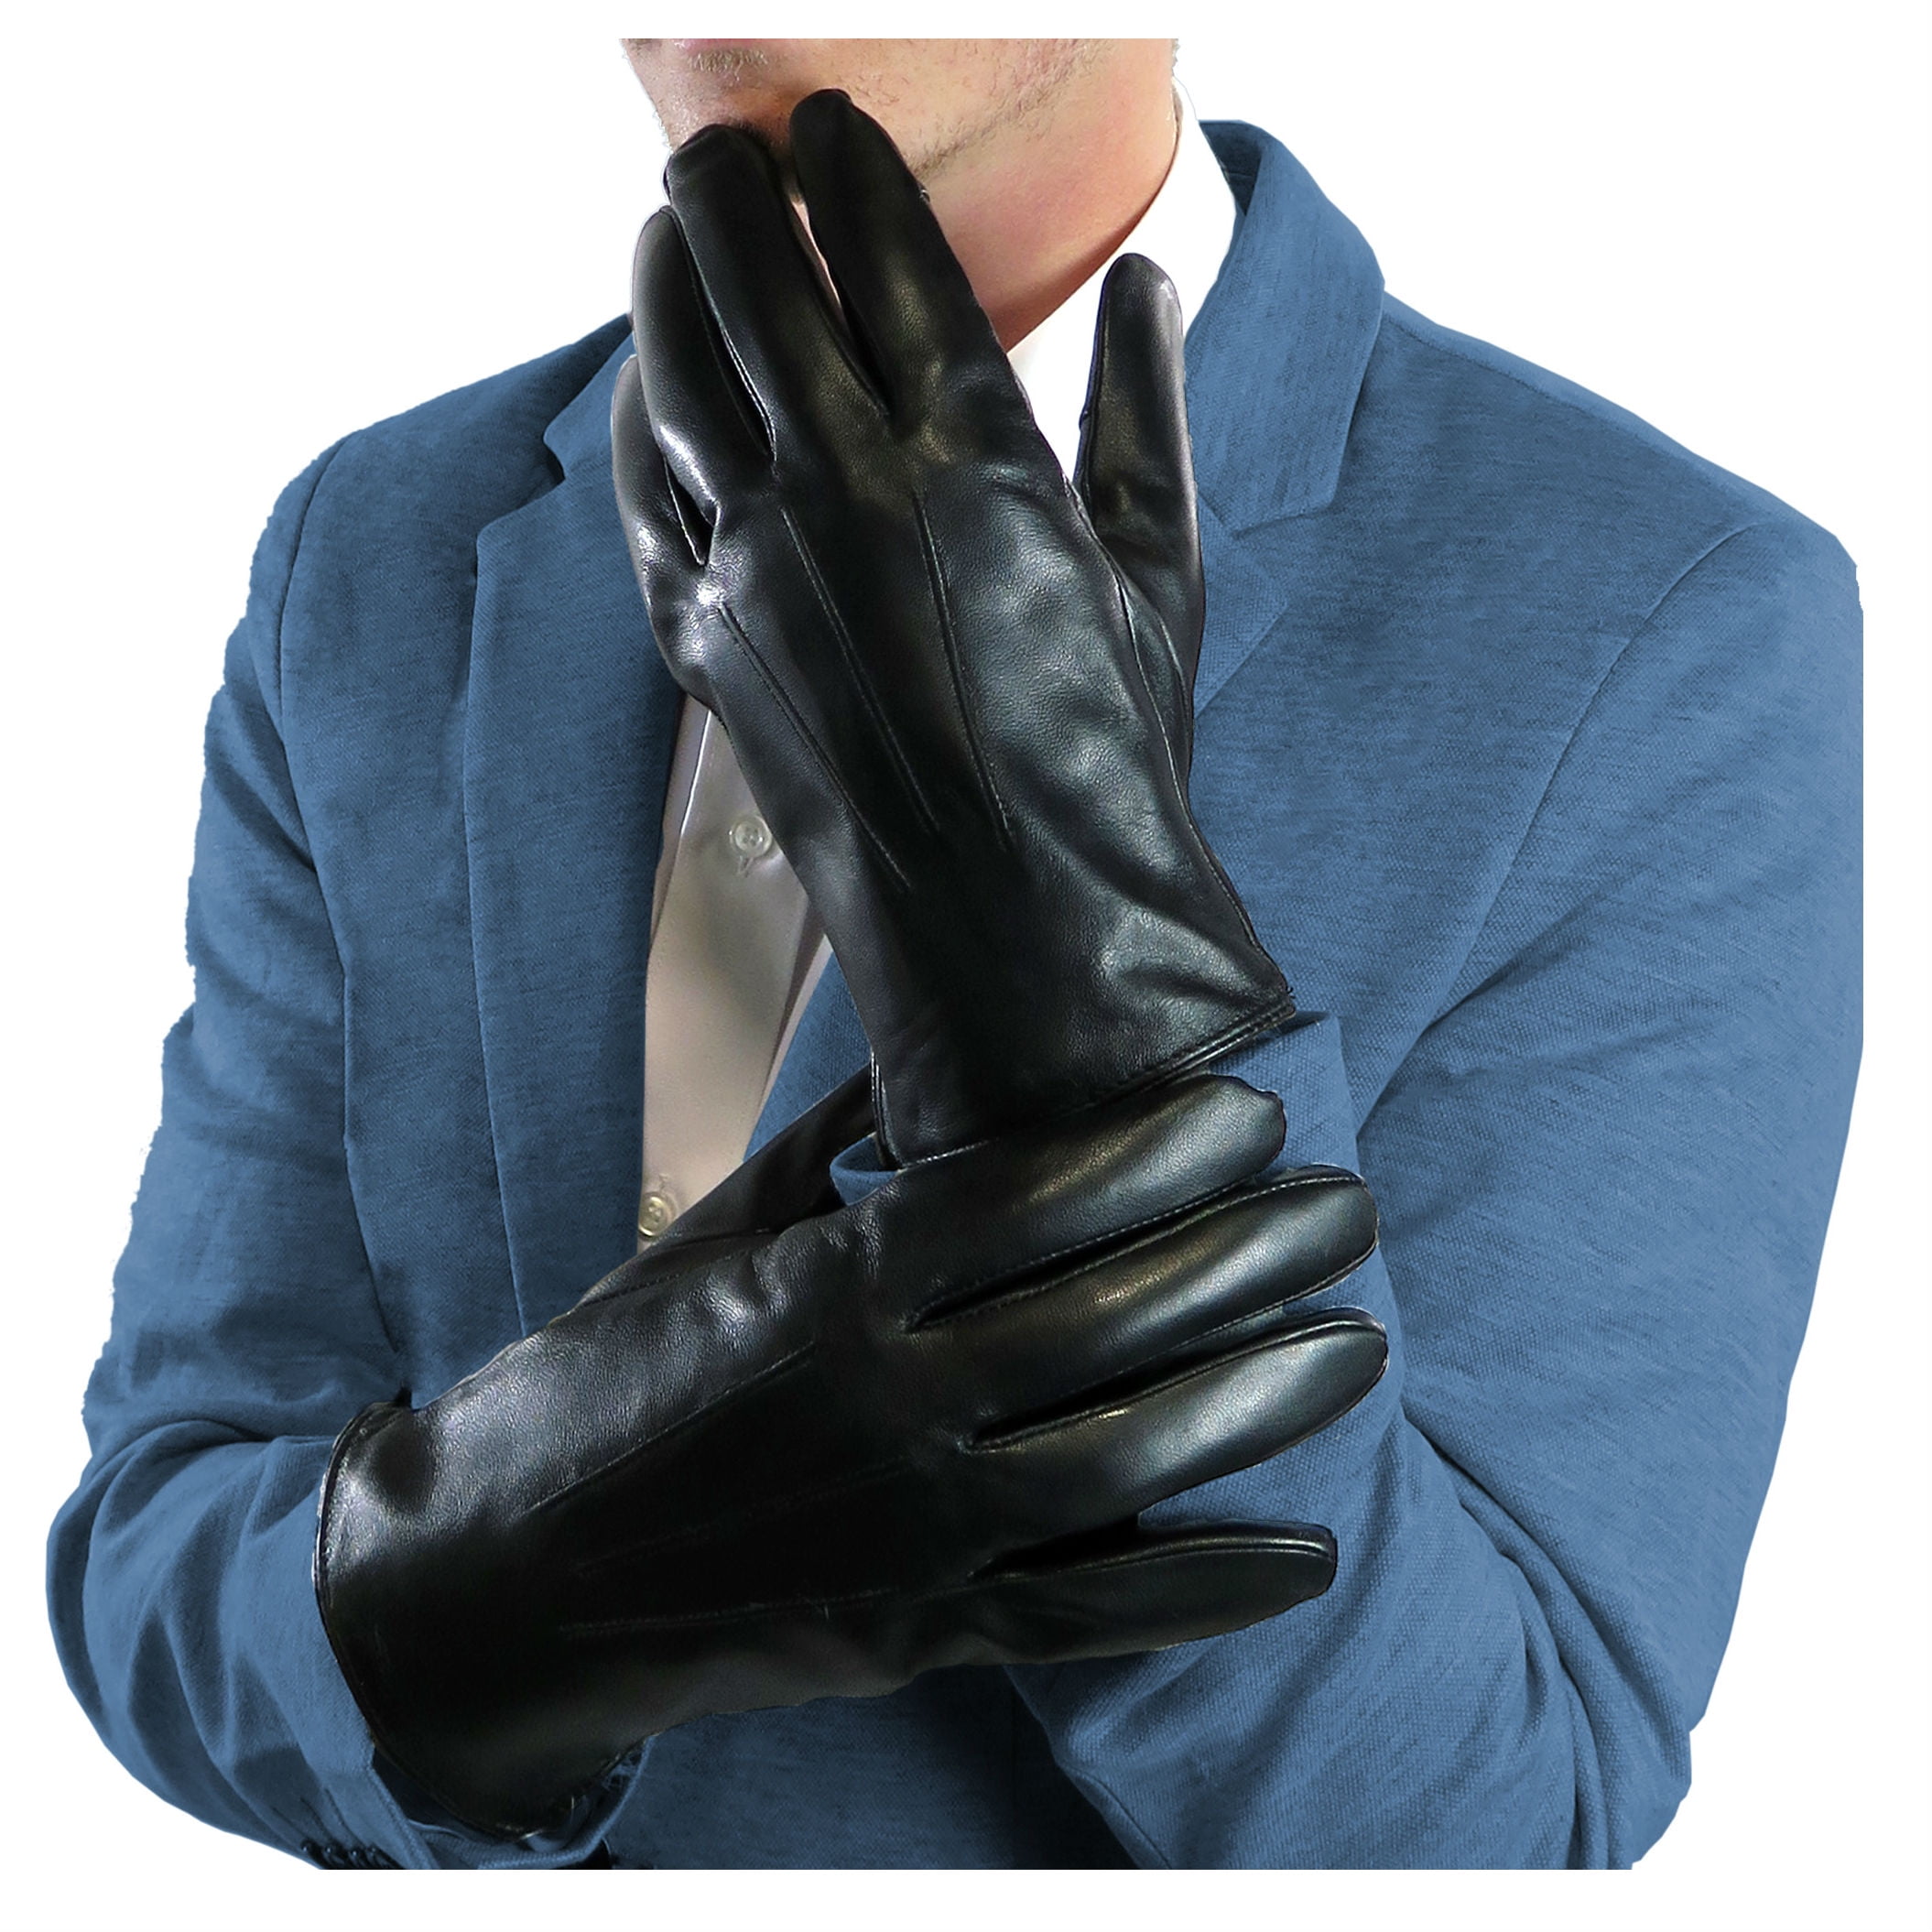 MENS TOUCH SCREEN 100% LEATHER GLOVES THERMAL LINED BLACK DRIVING WINTER GIFT